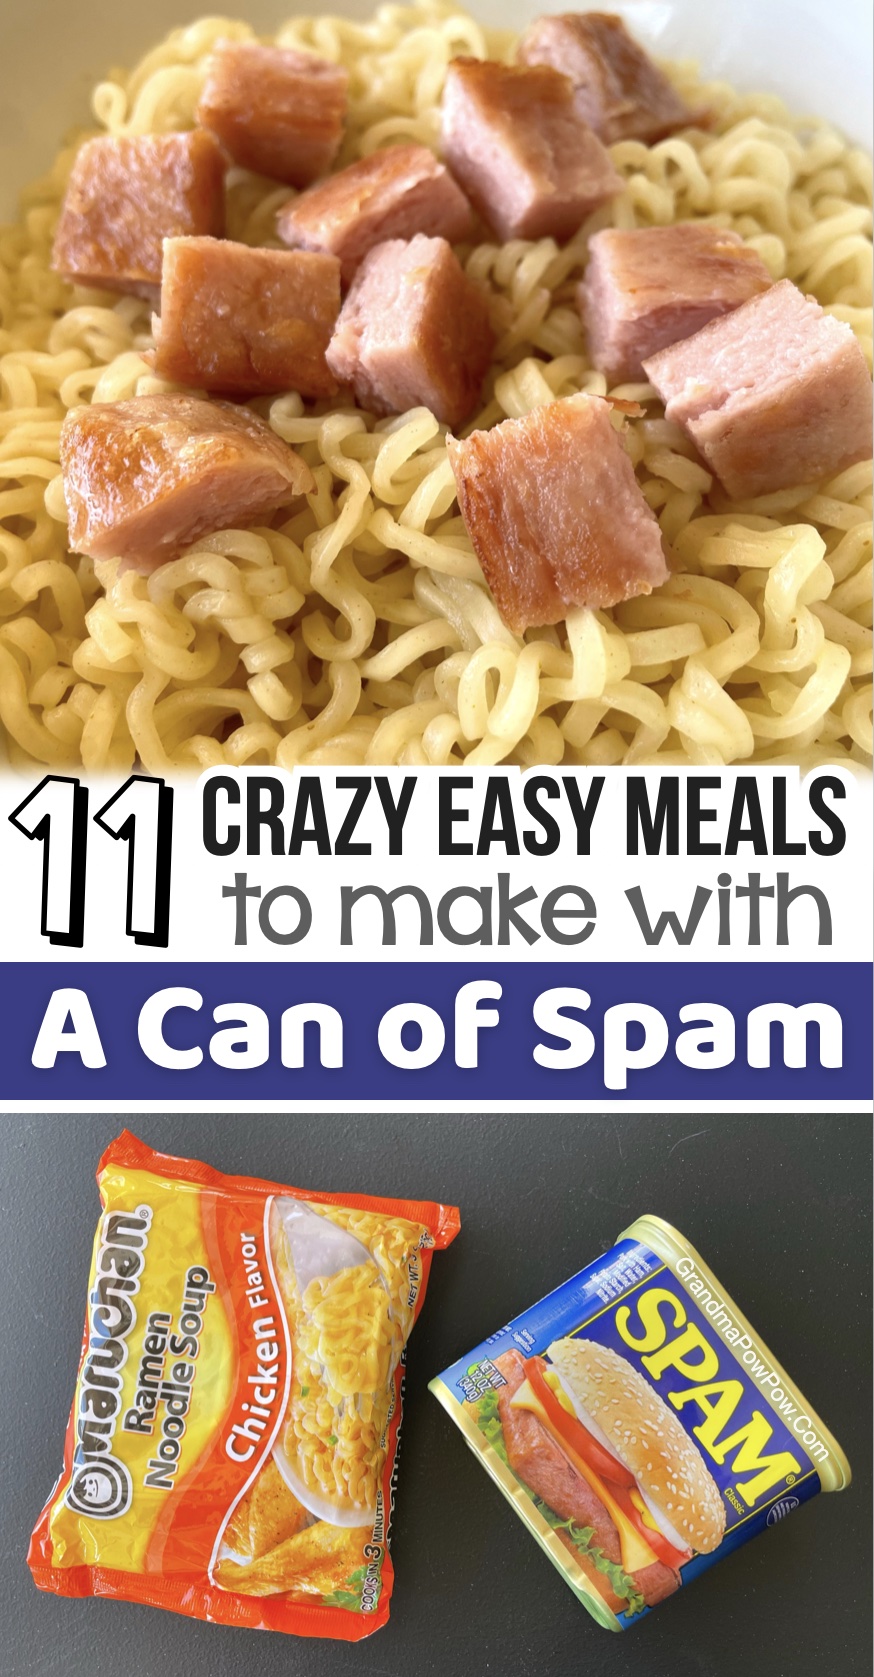 Spam Recipes For Dinner | Are you looking for cheap and easy dinner ideas for your picky family? Try spam! It tastes like bacon, but is way cheap and lasts a lot longer.